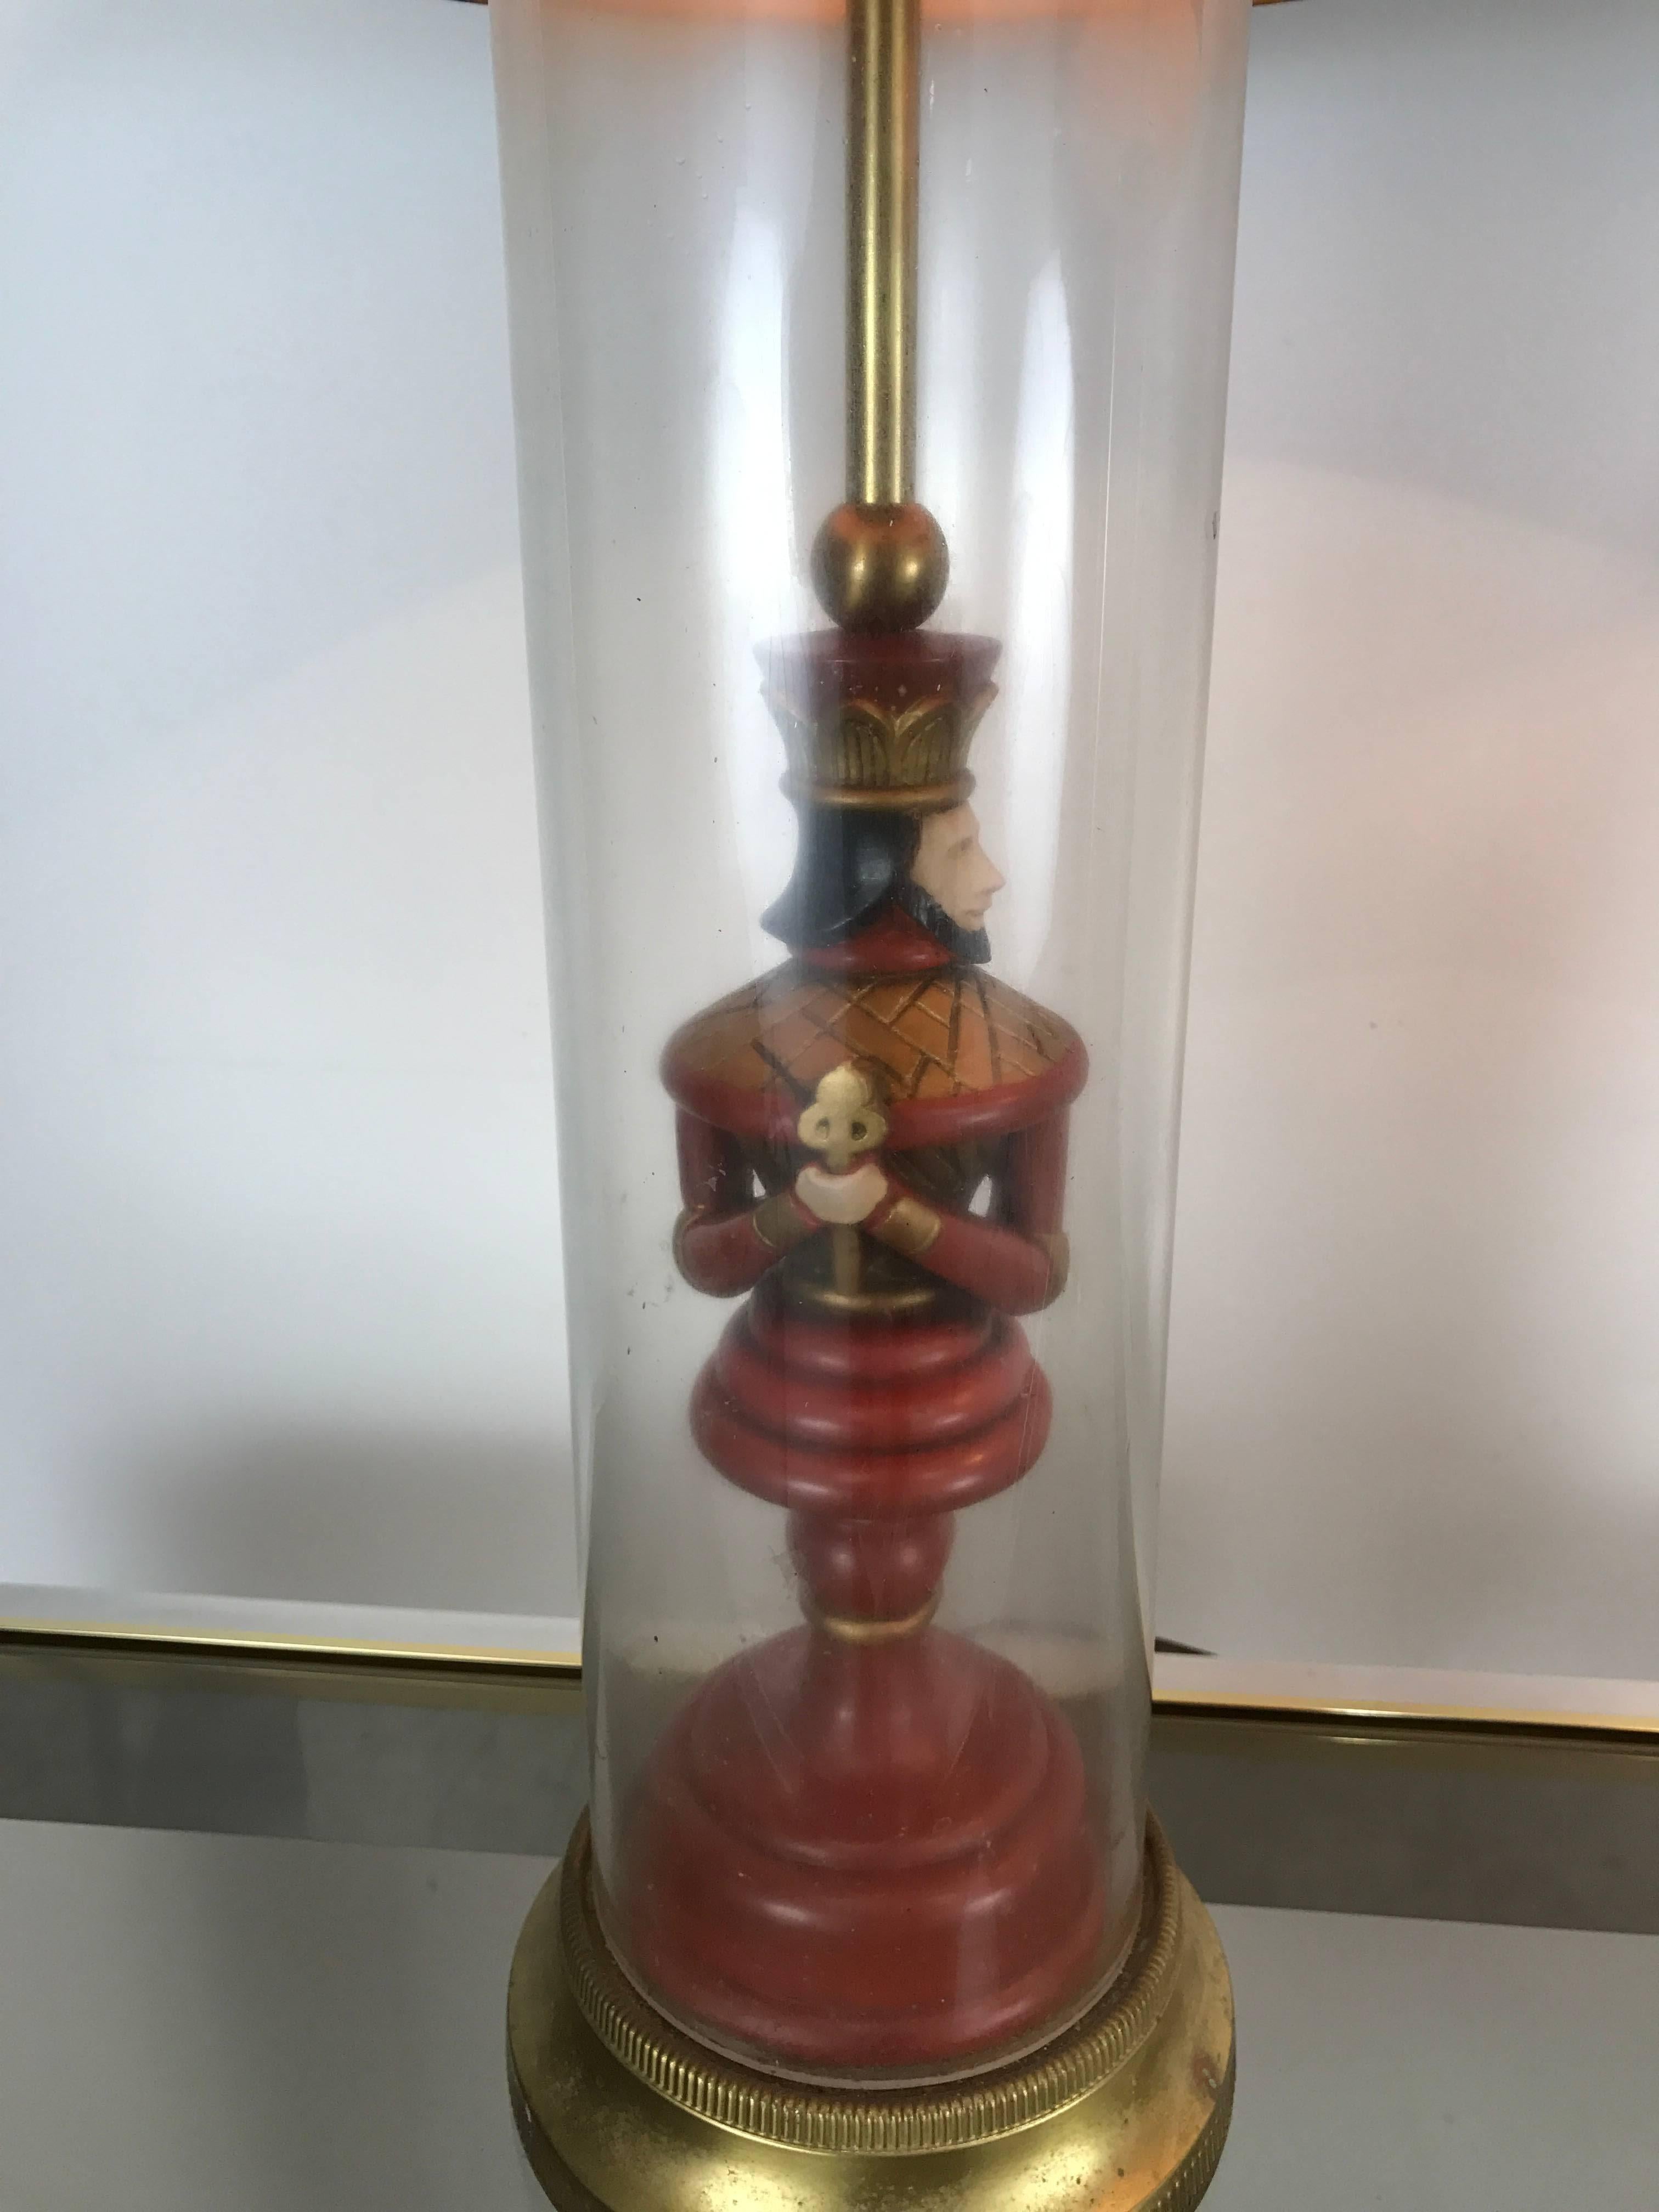 Unusual pair of decorator lamps, chess themed king figures encased in glass cylinders. Retain original lamp shades and finials. Shades measure 15